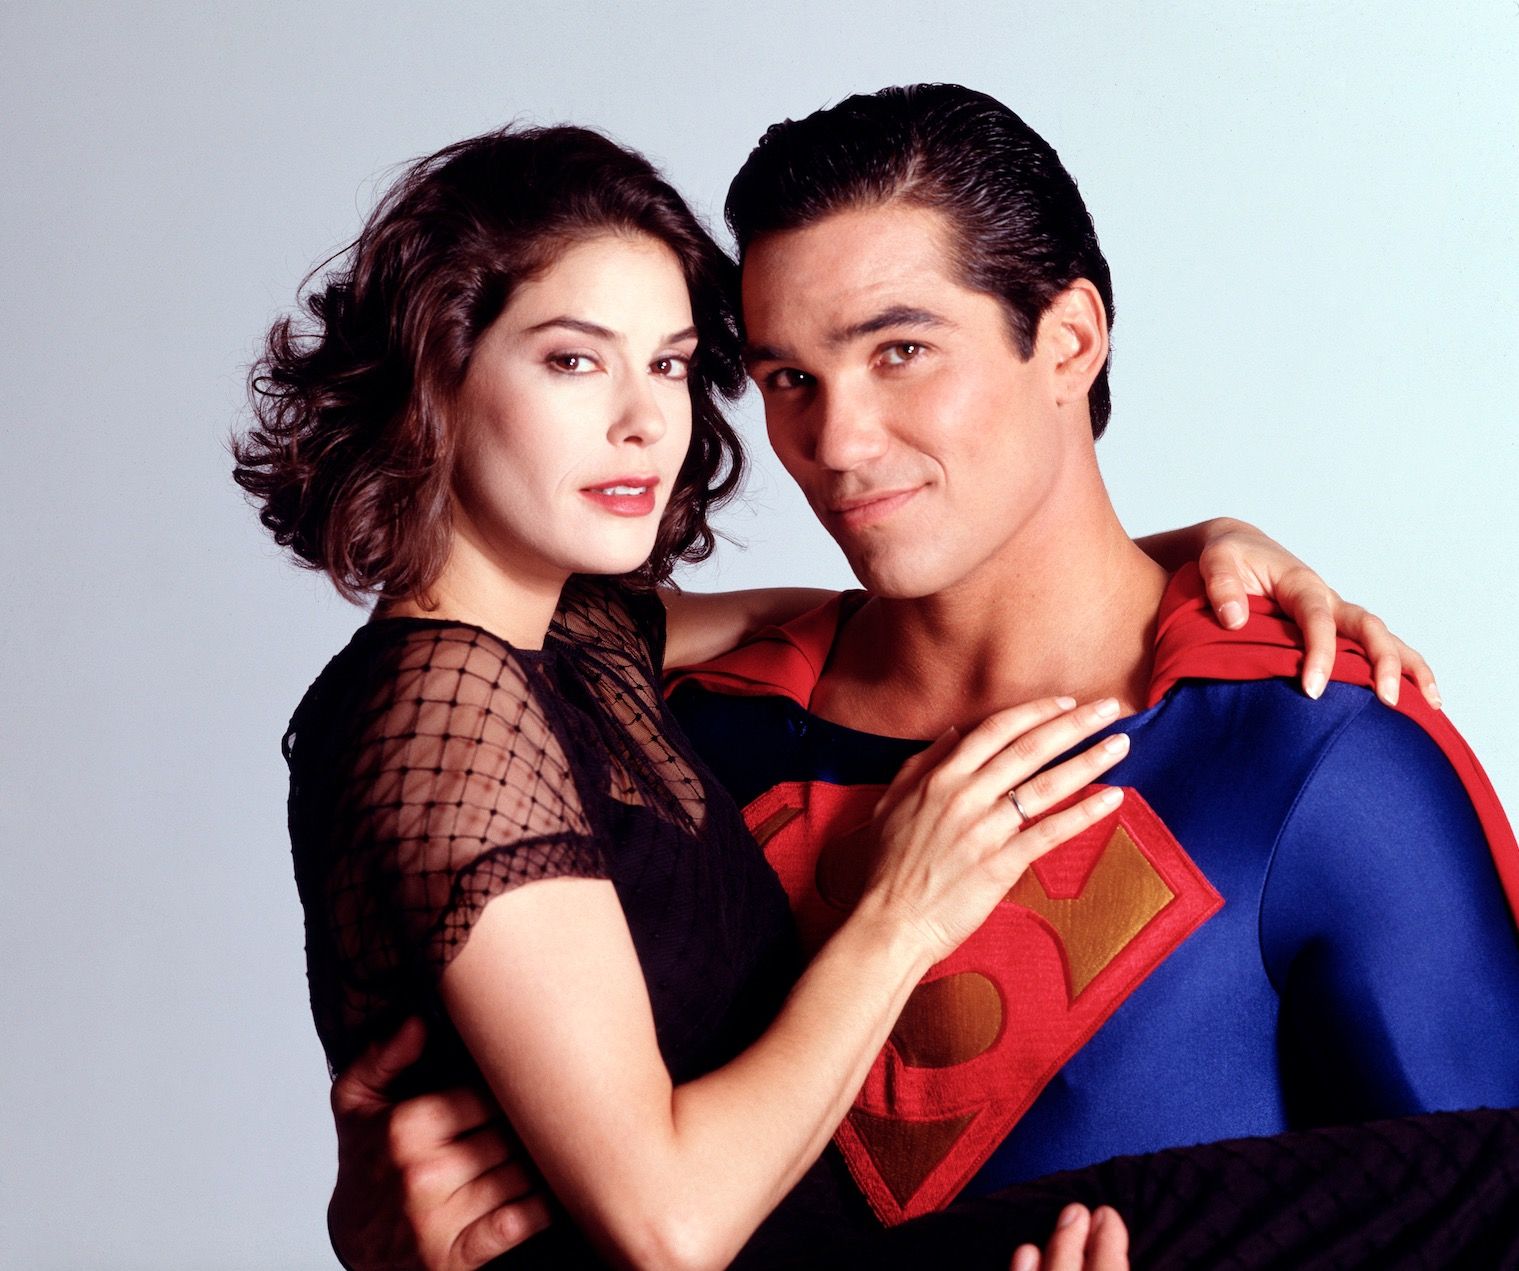 lois and clark the new adventures of superman lois lane